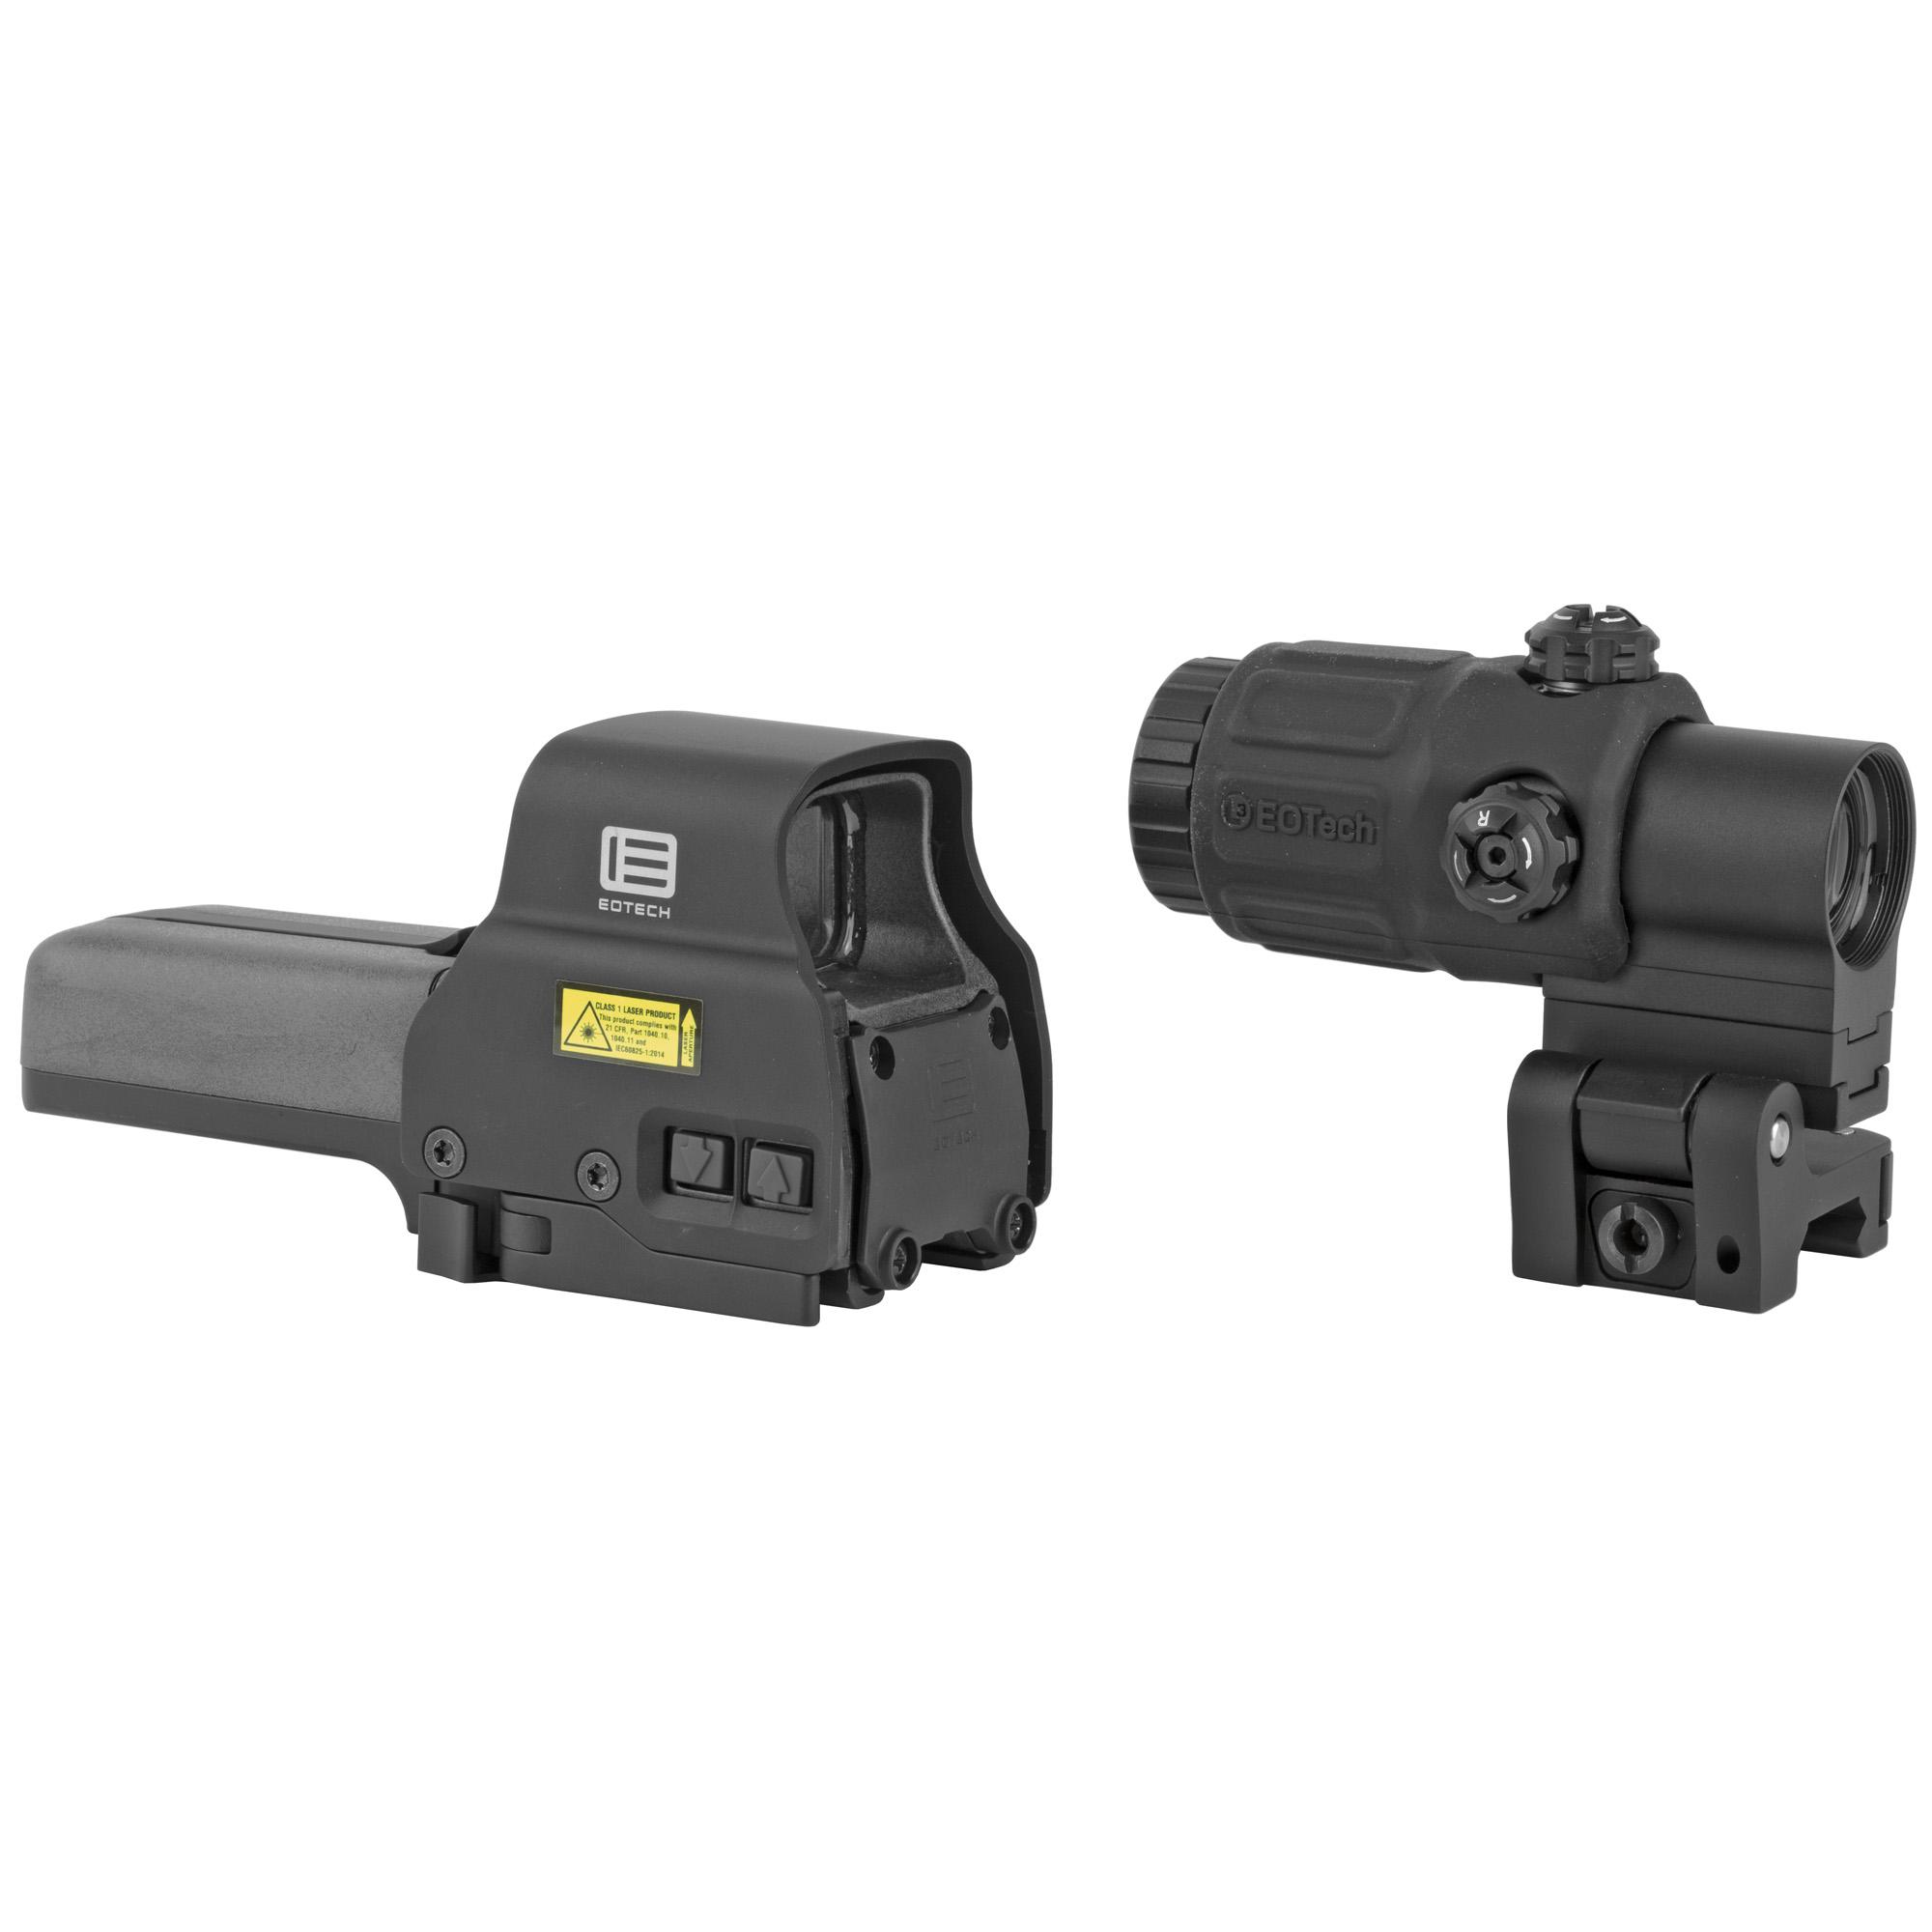 EOTech Eotech Hhs Iii 518-2 With G33